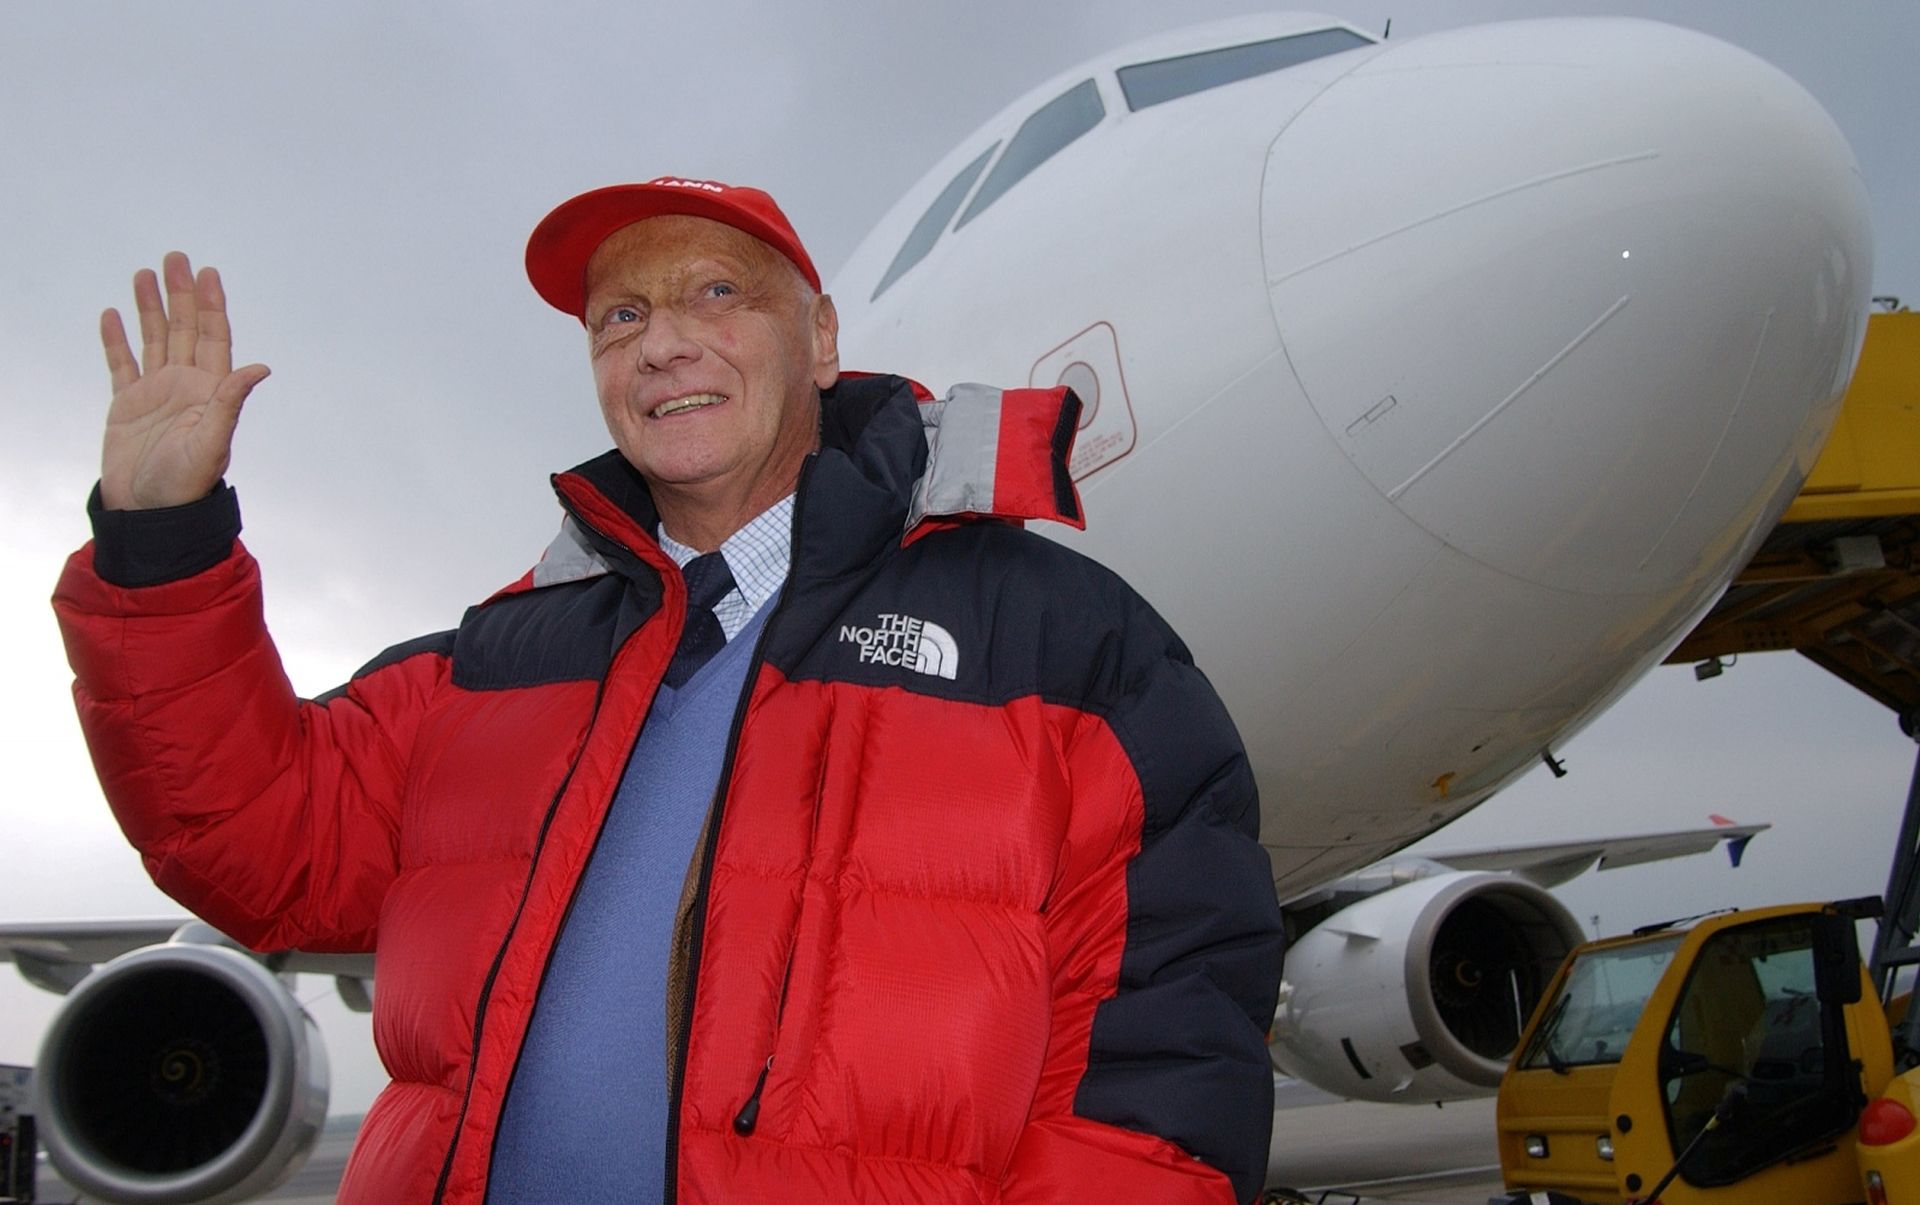 FILE PHOTO: Former Formula One World Champion Niki Lauda poses for photographers in front of an airbus A320 at Vienna's Airport, Austria FILE PHOTO: Former Formula One World Champion Niki Lauda poses for photographers in front of an airbus A320 at Vienna's Airport, Austria November 28, 2003. REUTERS/Heinz-Peter Bader/File Photo Heinz-Peter Bader